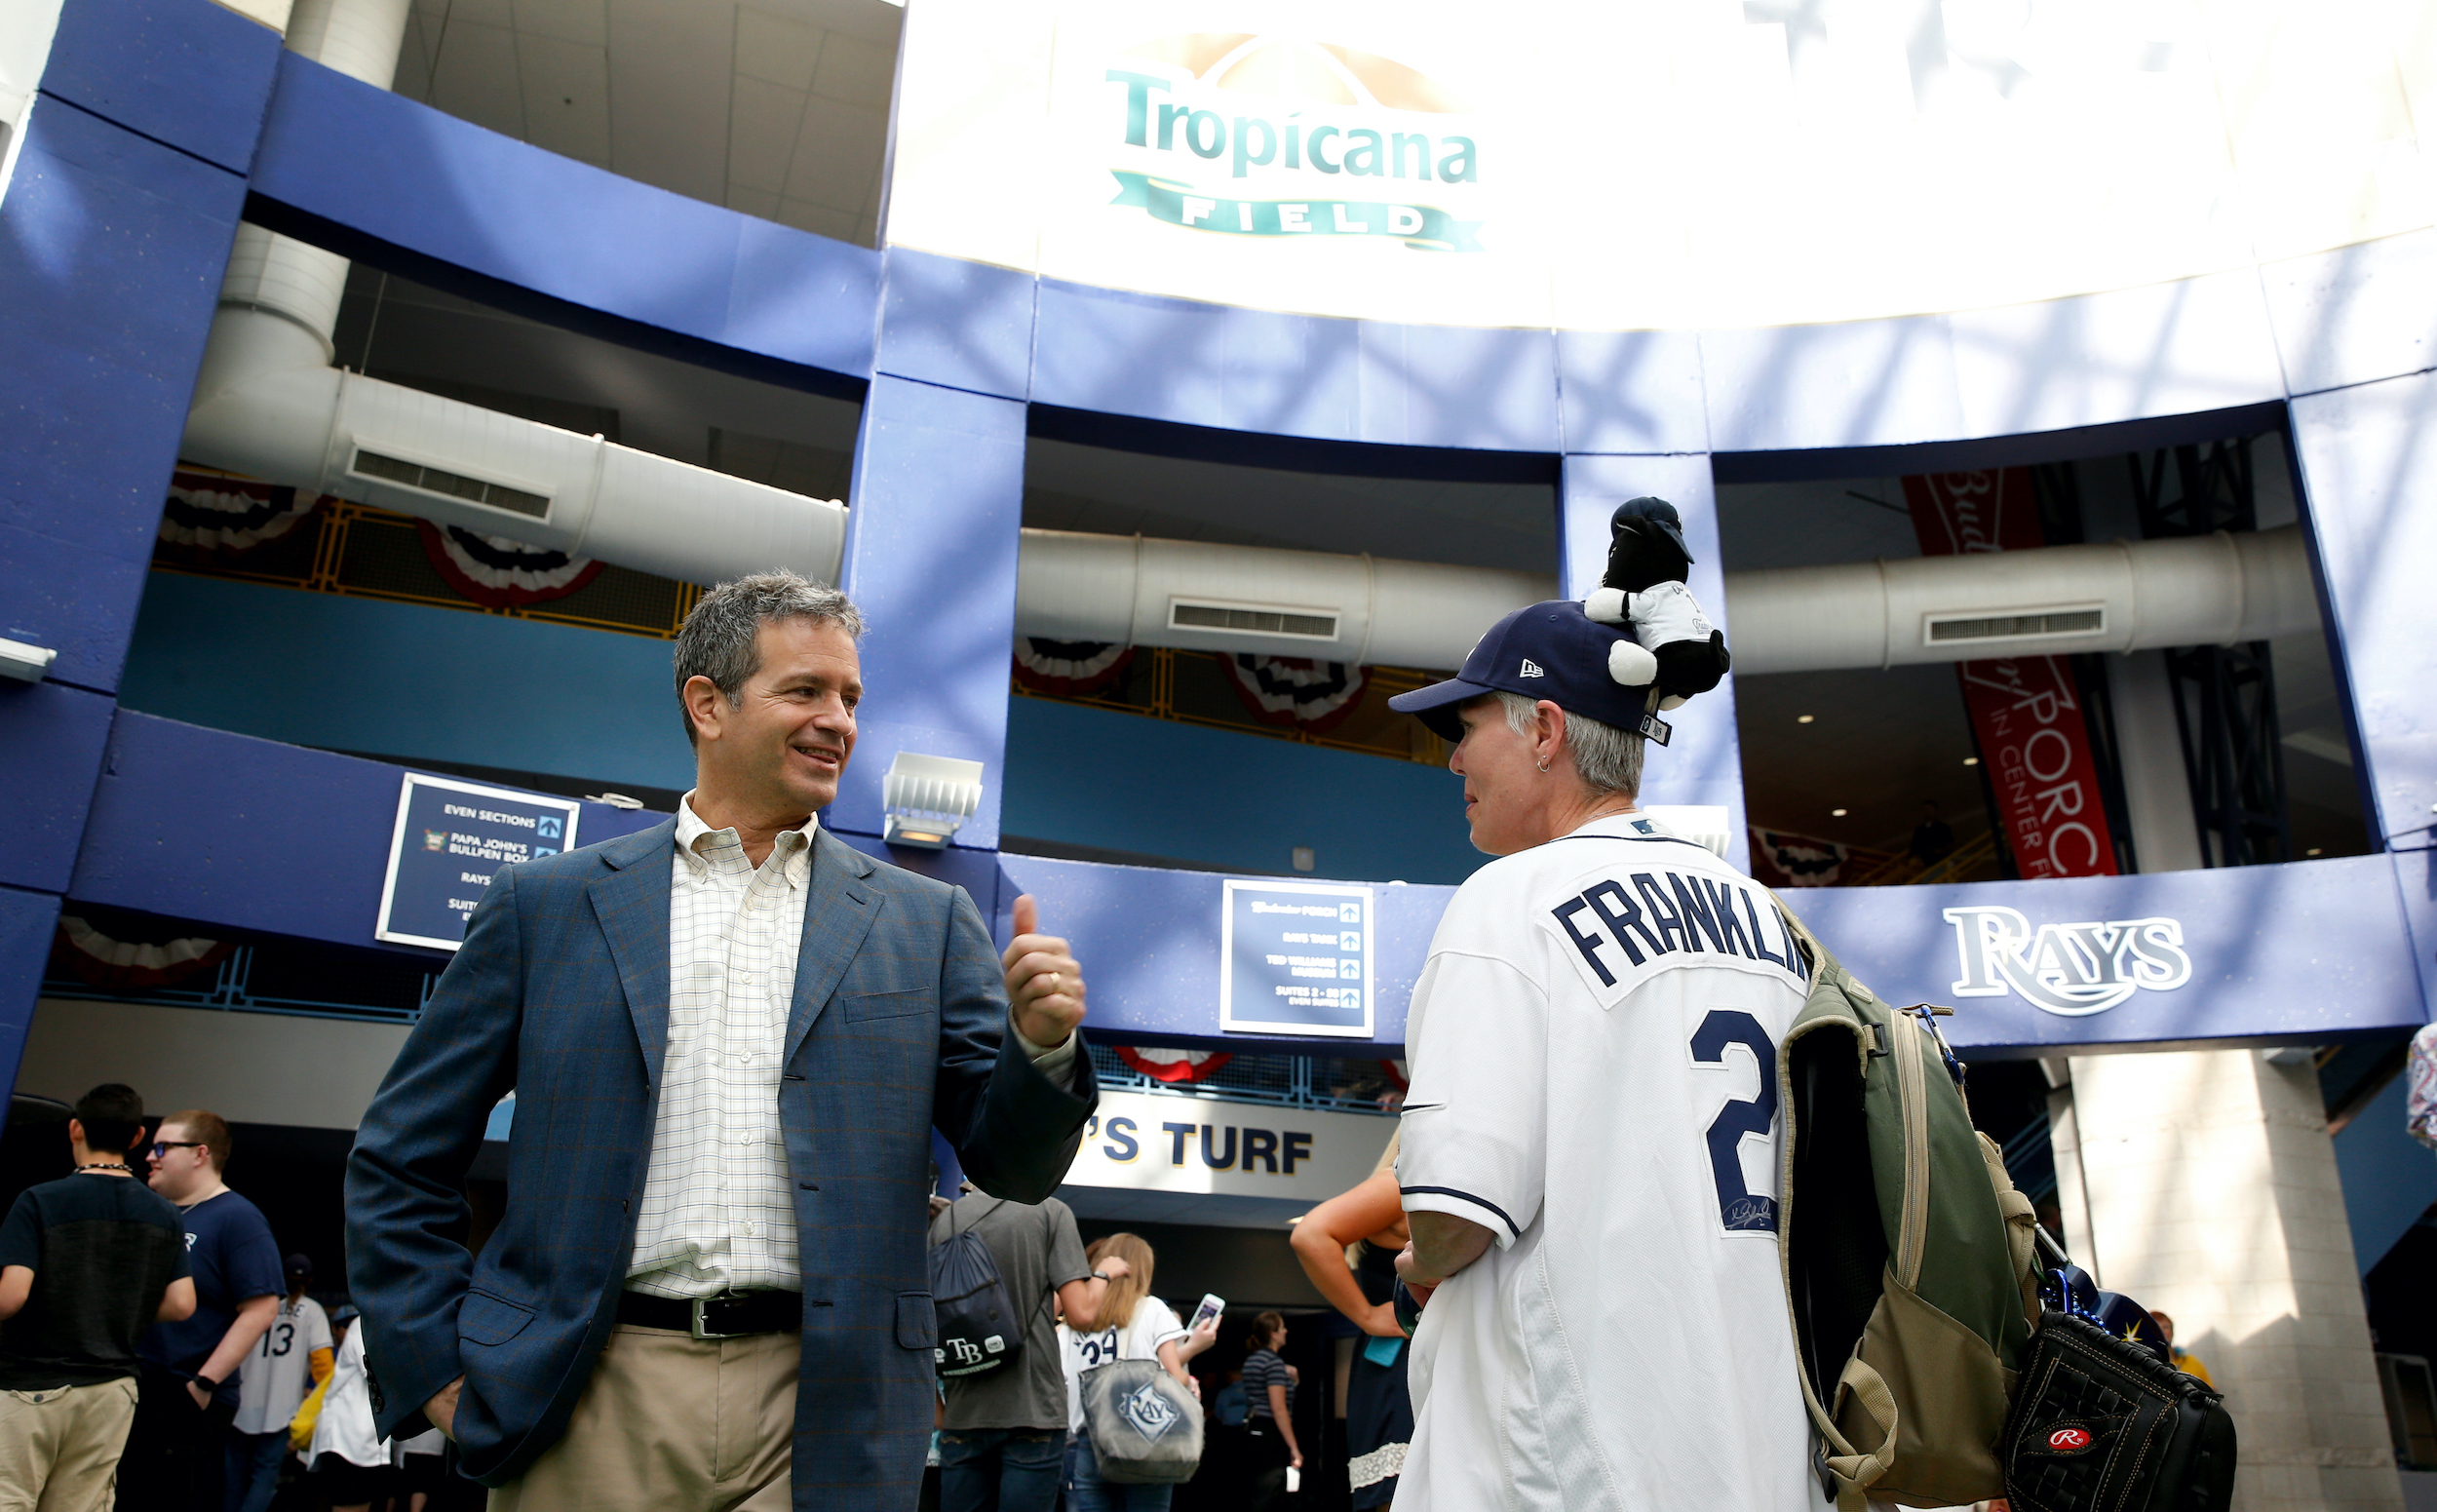 Tampa Bay Rays owner Stuart Sternberg greets baseball fans as they arrive for the first game of the season on Opening Day before the start of a game between the Rays and the New York Yankees on April 2, 2017 at Tropicana Field in St. Petersburg, Florida.